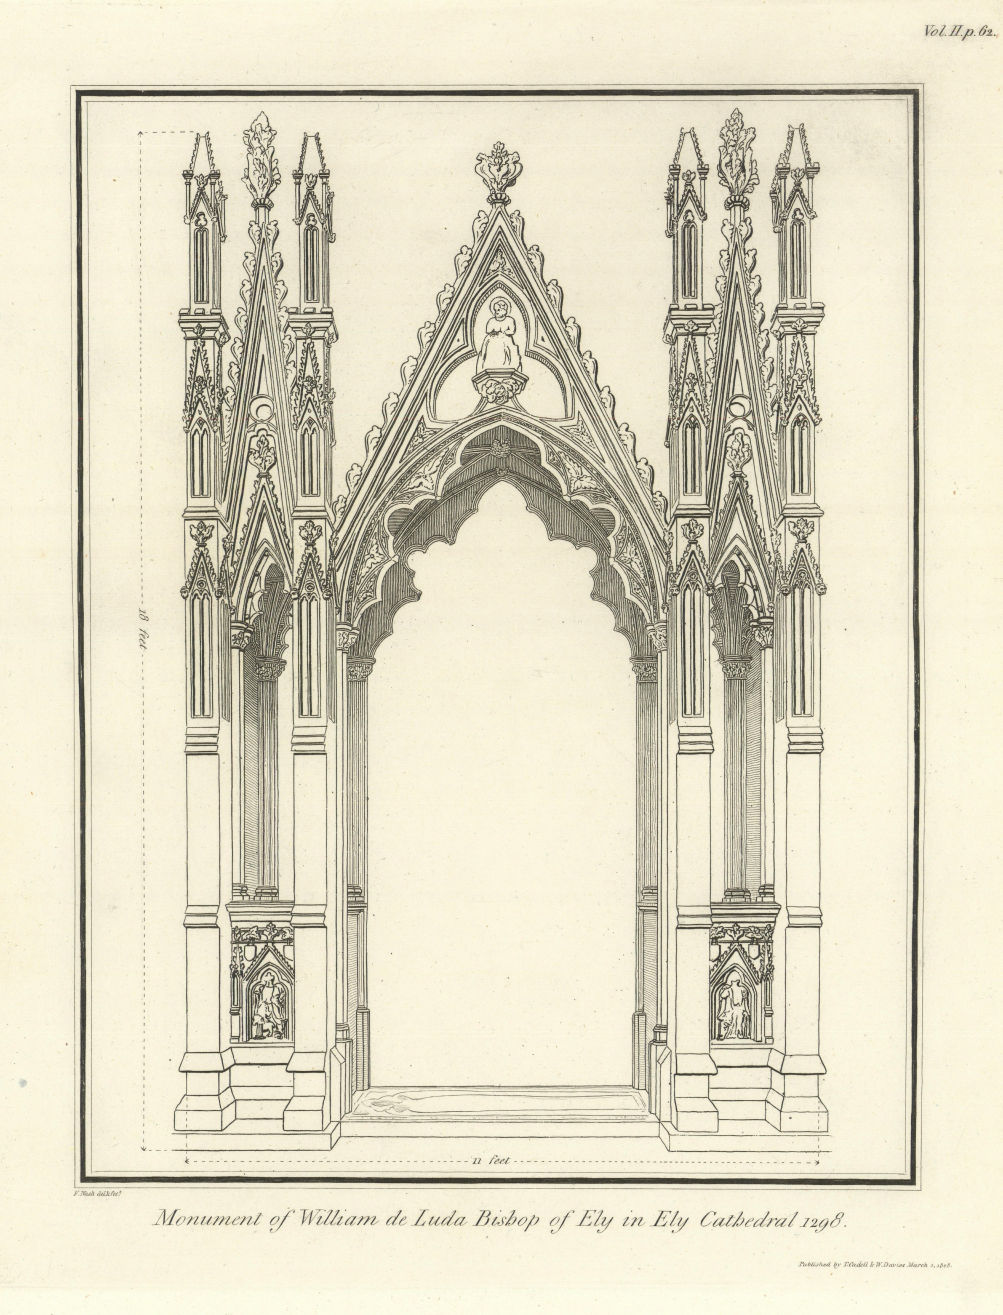 Associate Product Monument of Bishop De Luda in Ely Cathedral. NASH 1810 old antique print